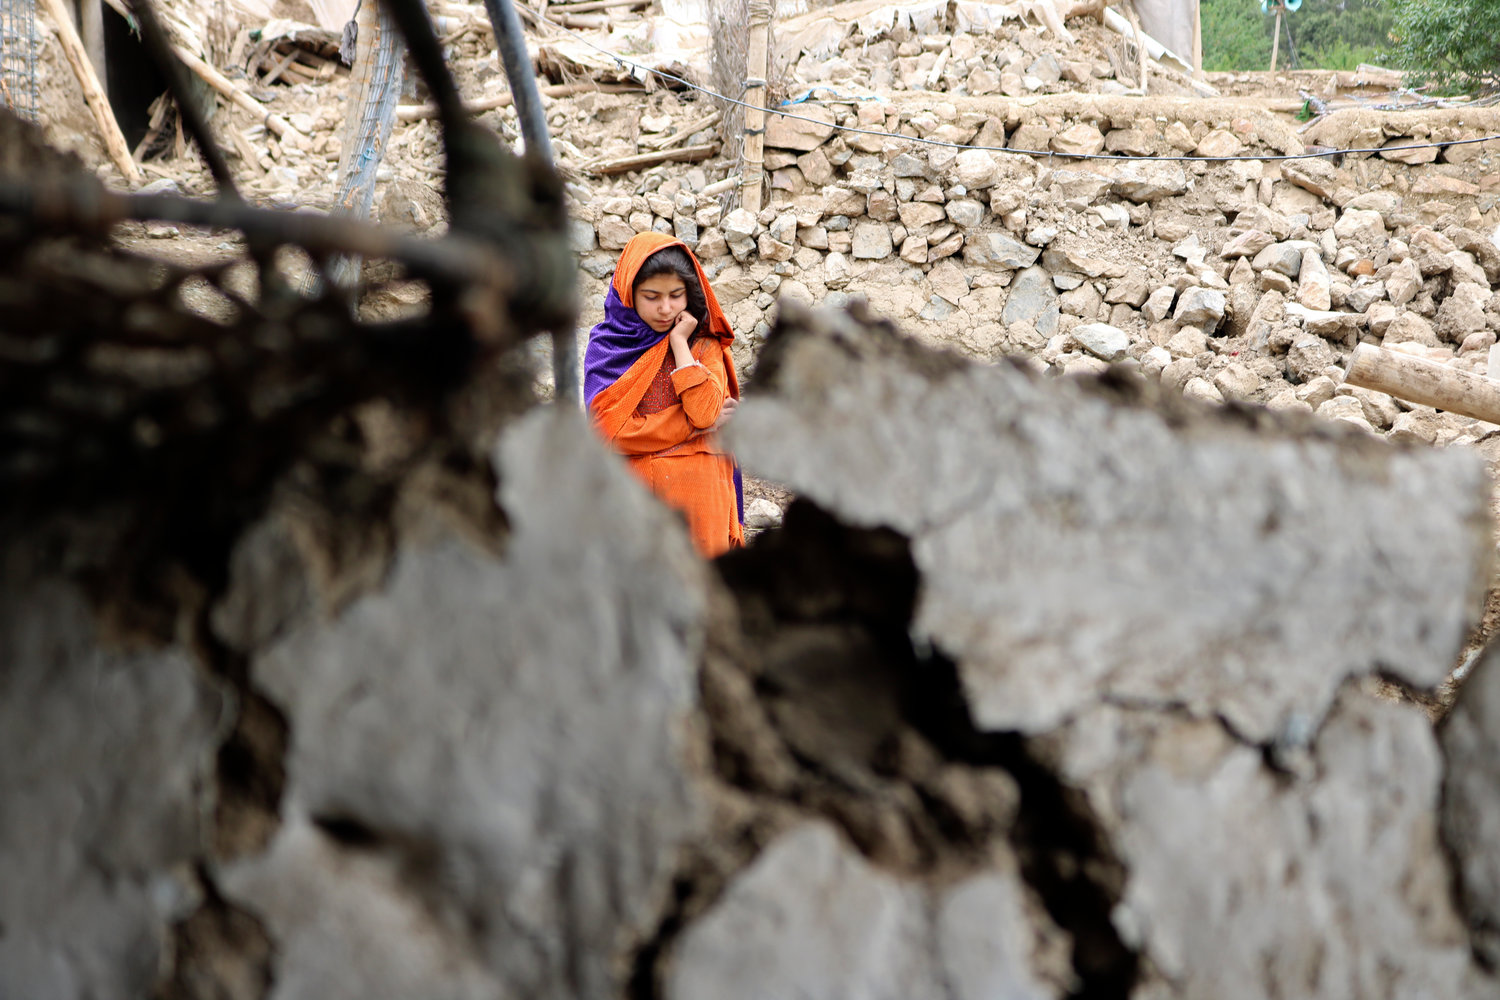 An Afghan girl stands near a house that was damaged by an earthquake in the Spera District of the southwestern part of Khost Province, Afghanistan, Wednesday, June 22, 2022. A powerful earthquake struck a rugged, mountainous region of eastern Afghanistan early Wednesday, killing at least 1,000 people and injuring 1,500 more in one of the country's deadliest quakes in decades, the state-run news agency reported. (AP Photo)